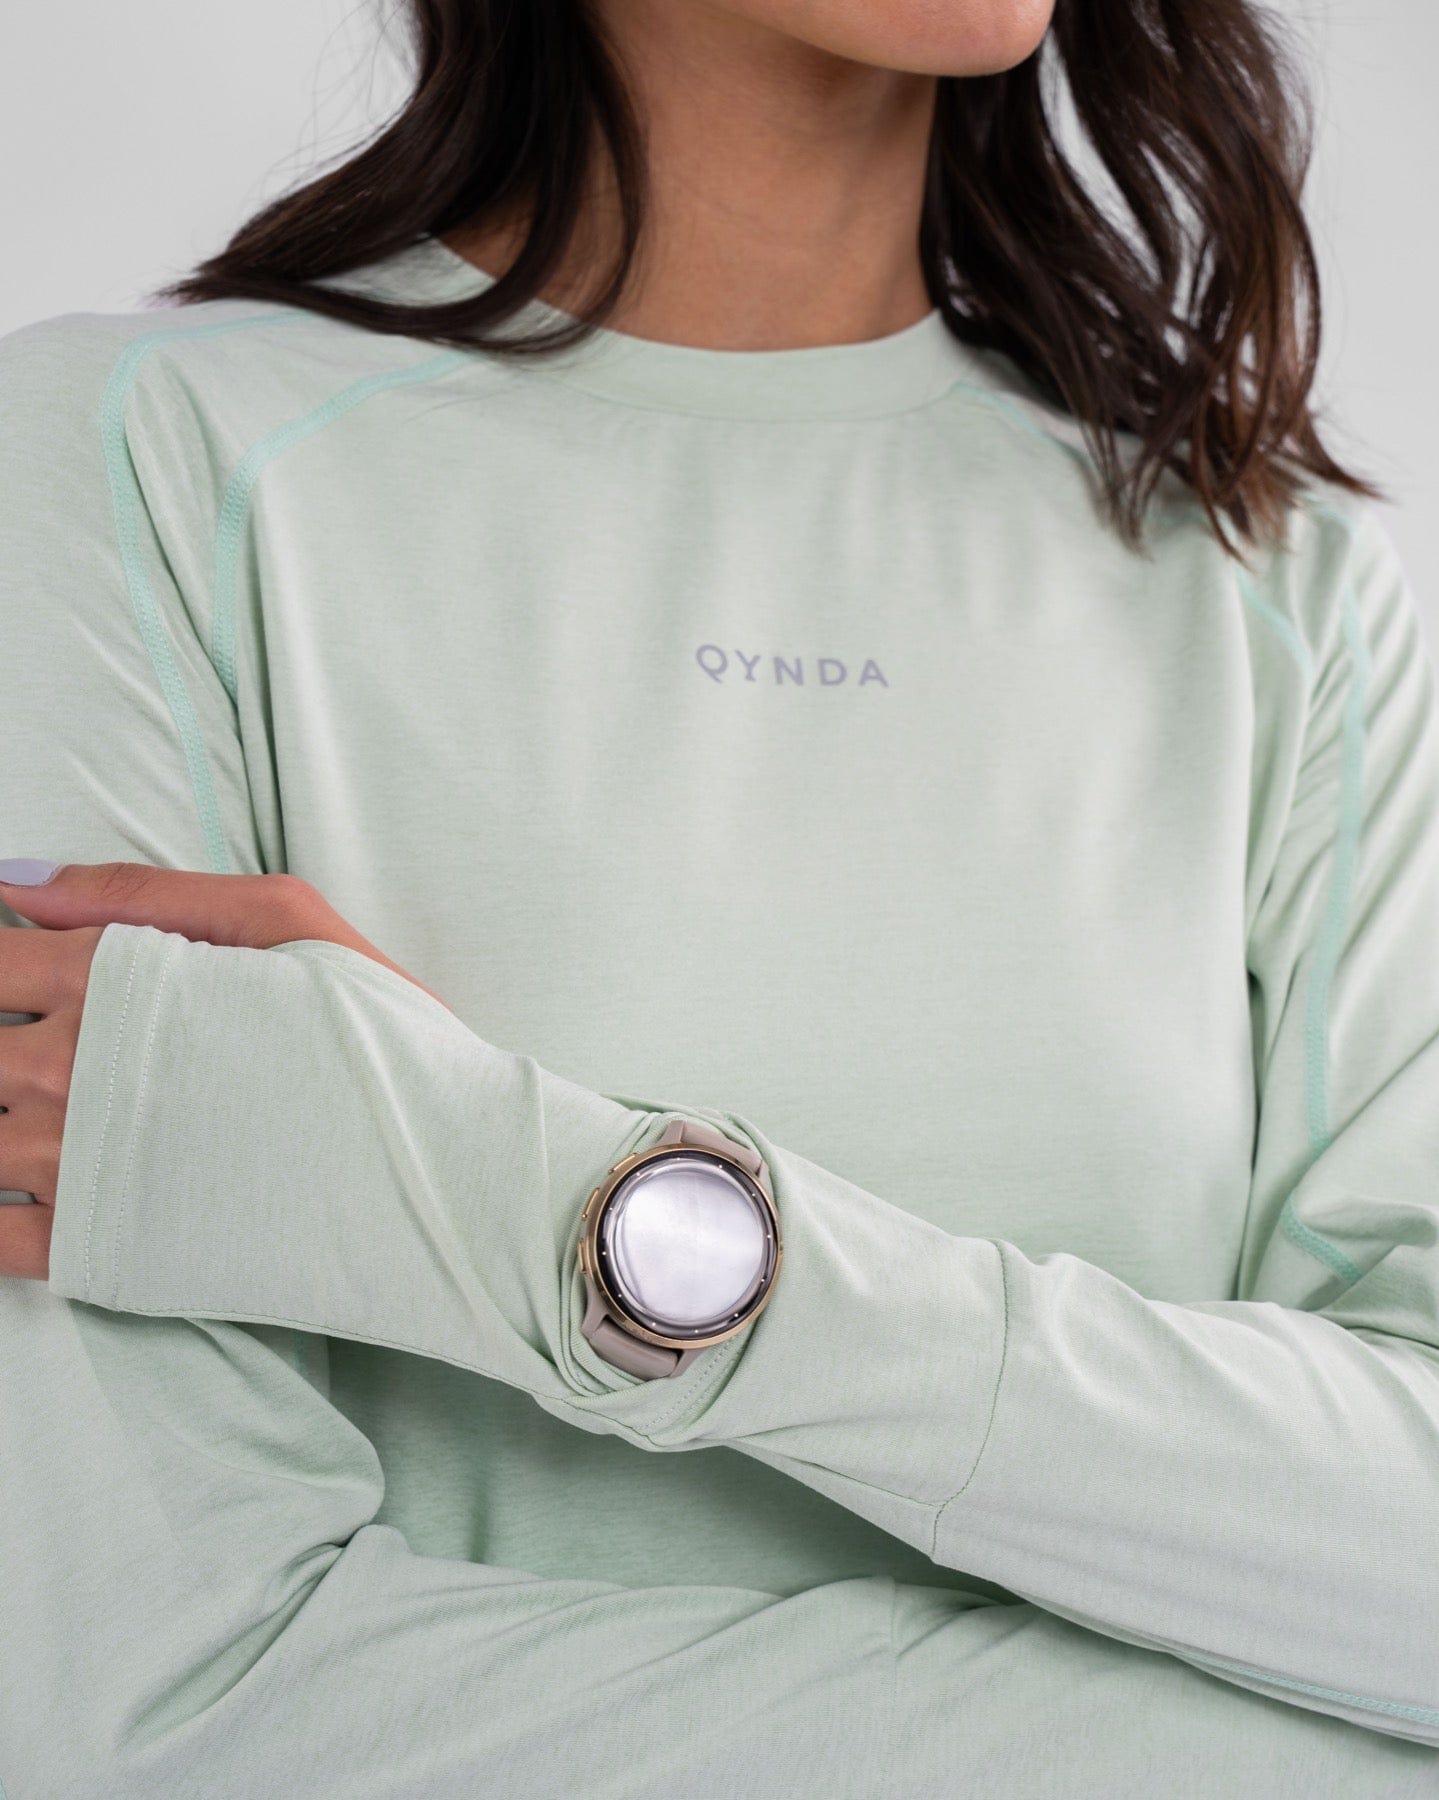 A woman in a modest athletic top with a qynda brand logo, made from moisture-resistant and quick-drying fabric, complemented by a large silver ring with a white stone on the index finger.